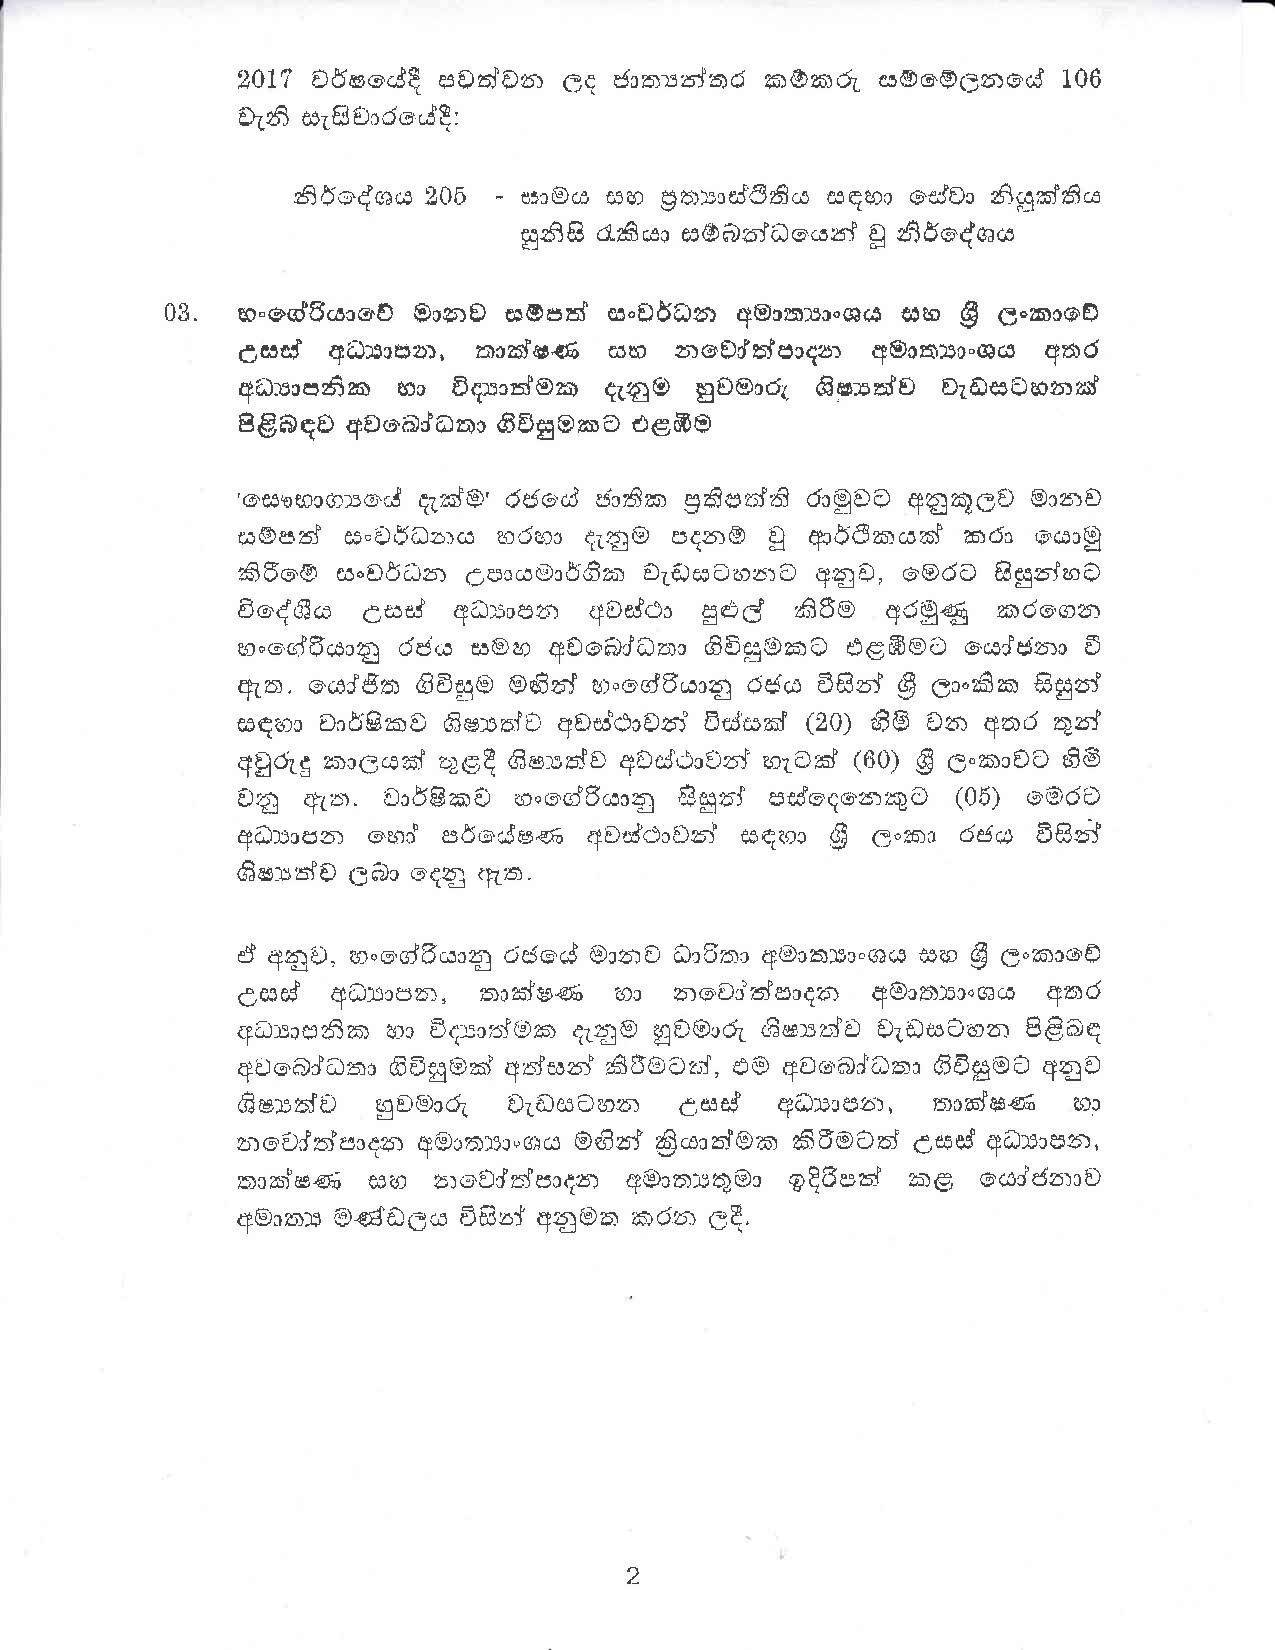 Cabinet Decision on 05.02.2020 page 002